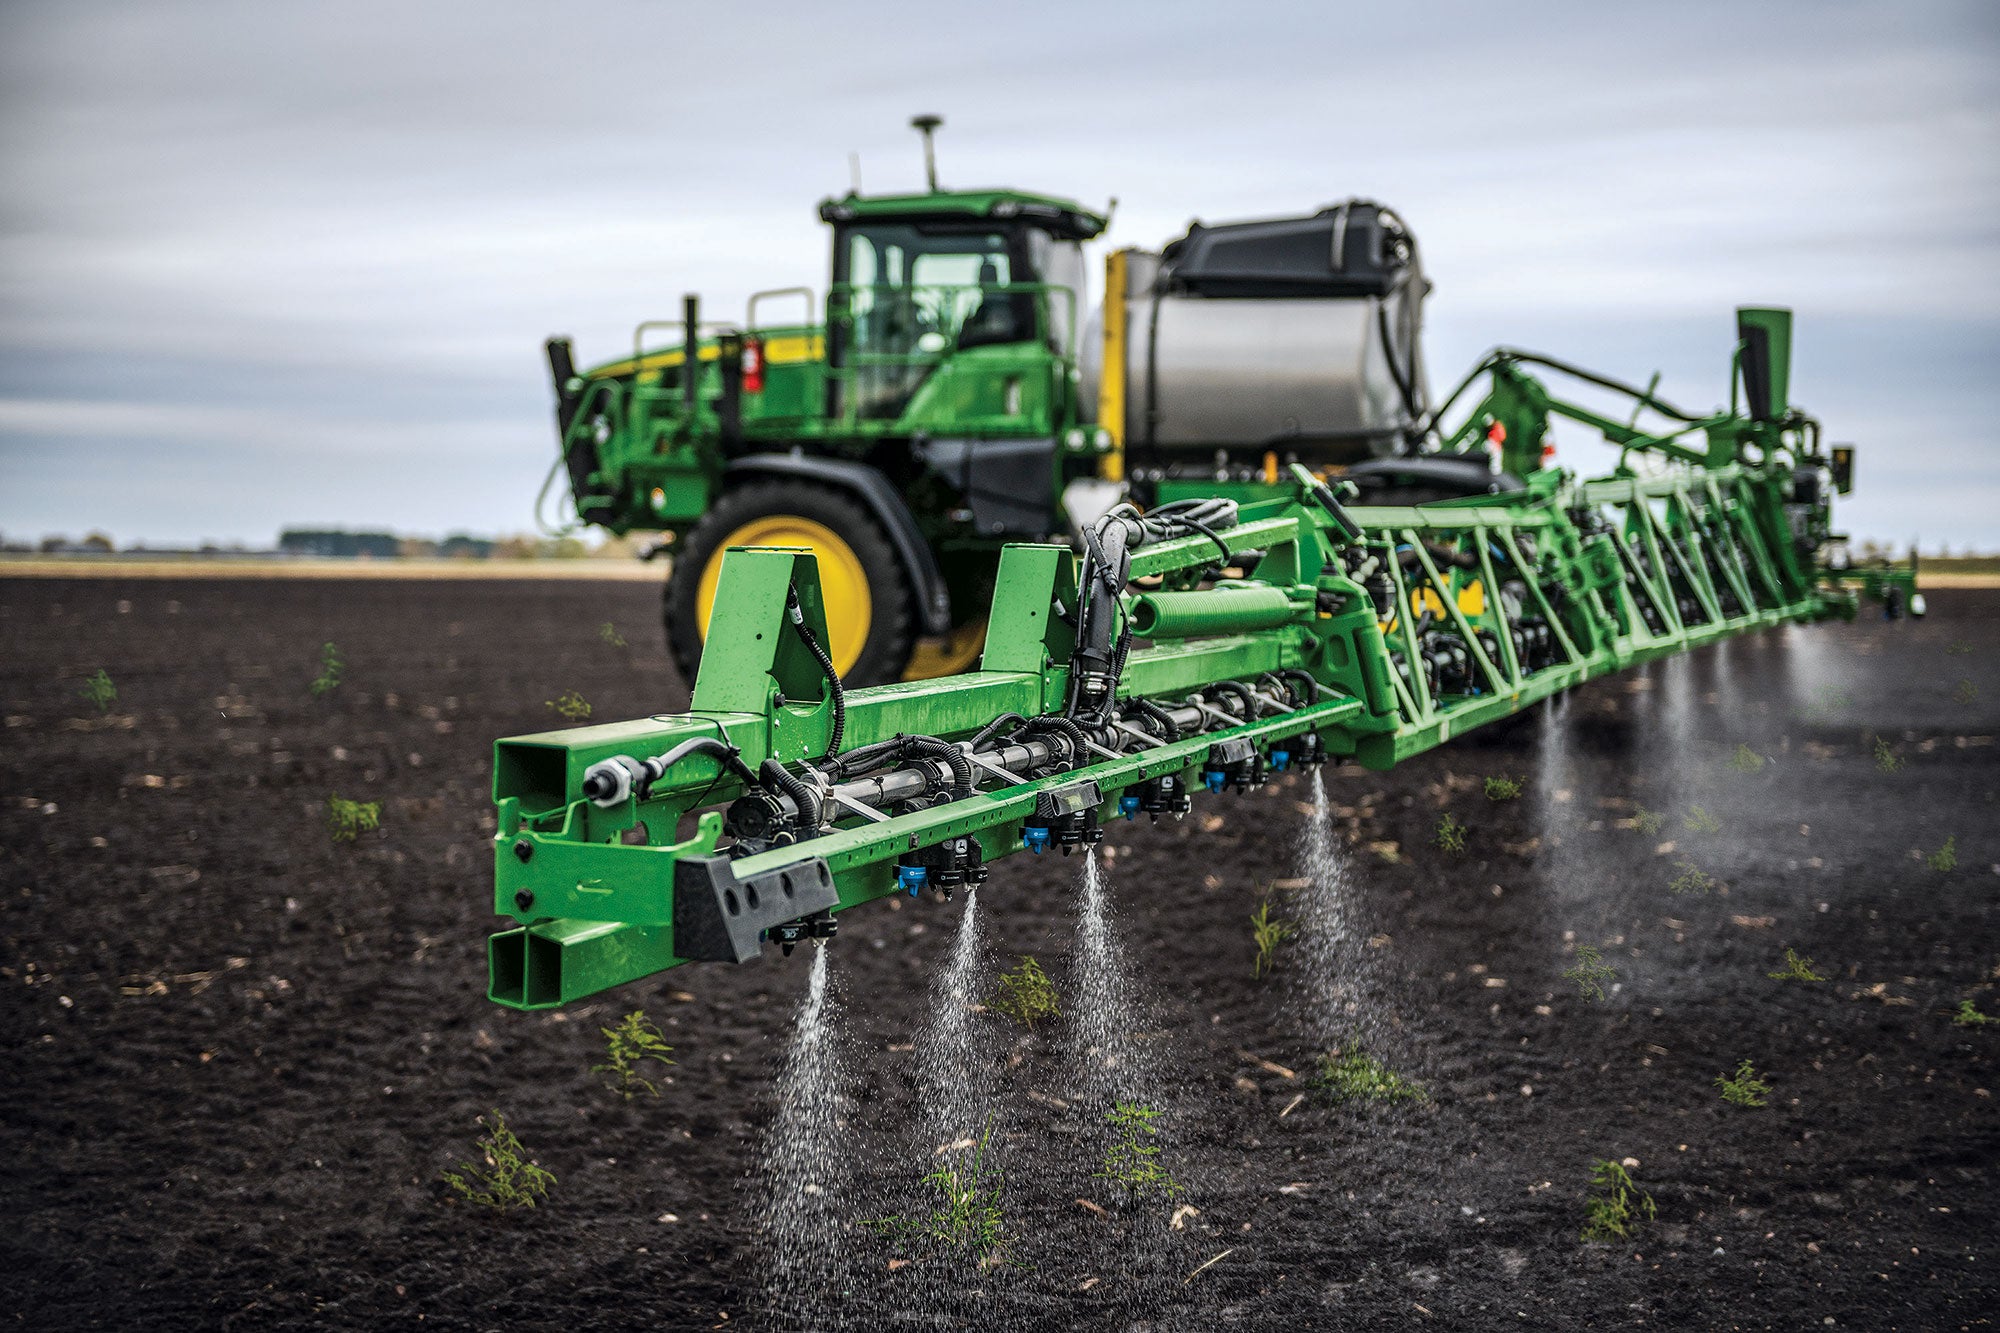 John Deere unveils updates during 2021 Commodity Classic AGDAILY